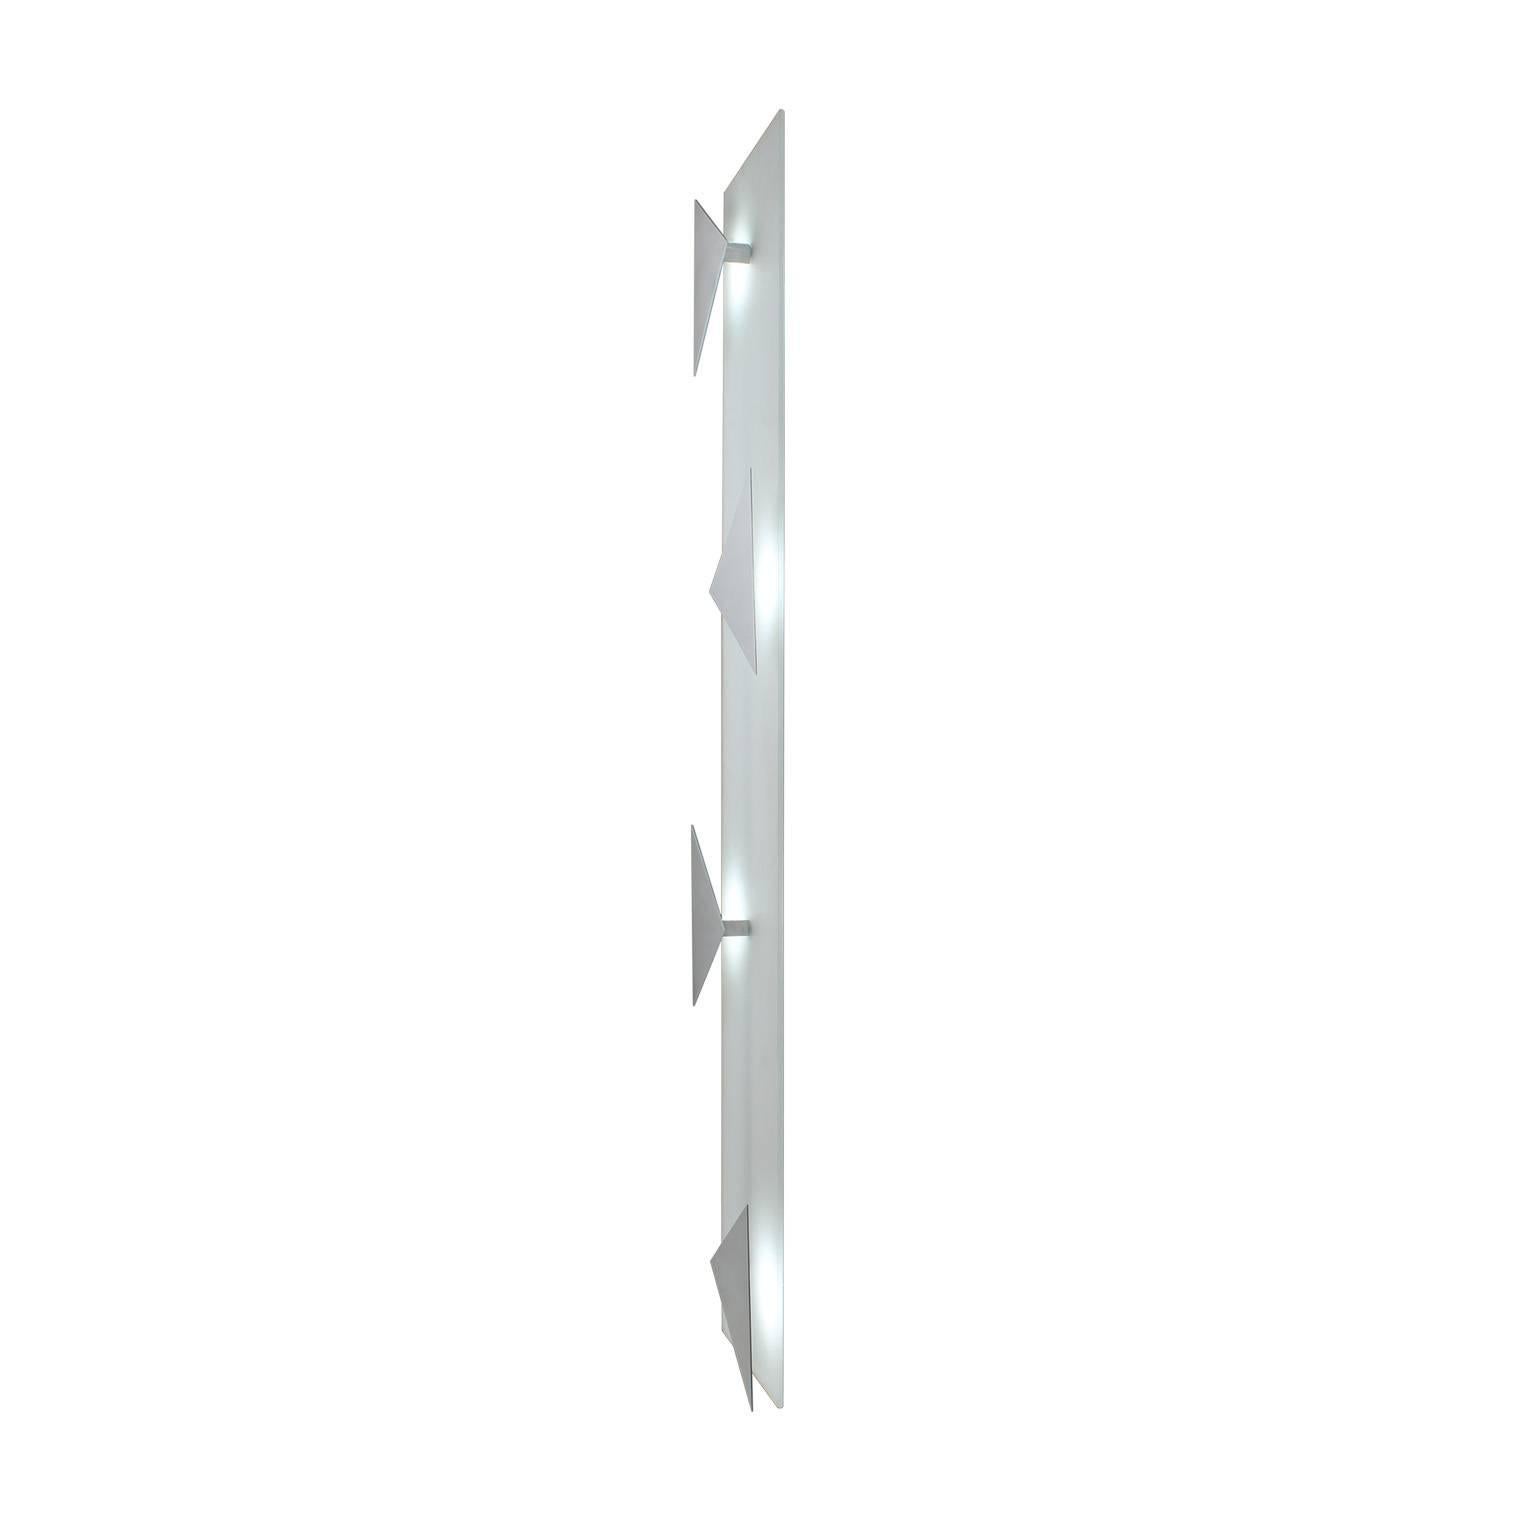 American Mid-Century Modern Style Wall Art Sconce Light White Glass with Triangles For Sale